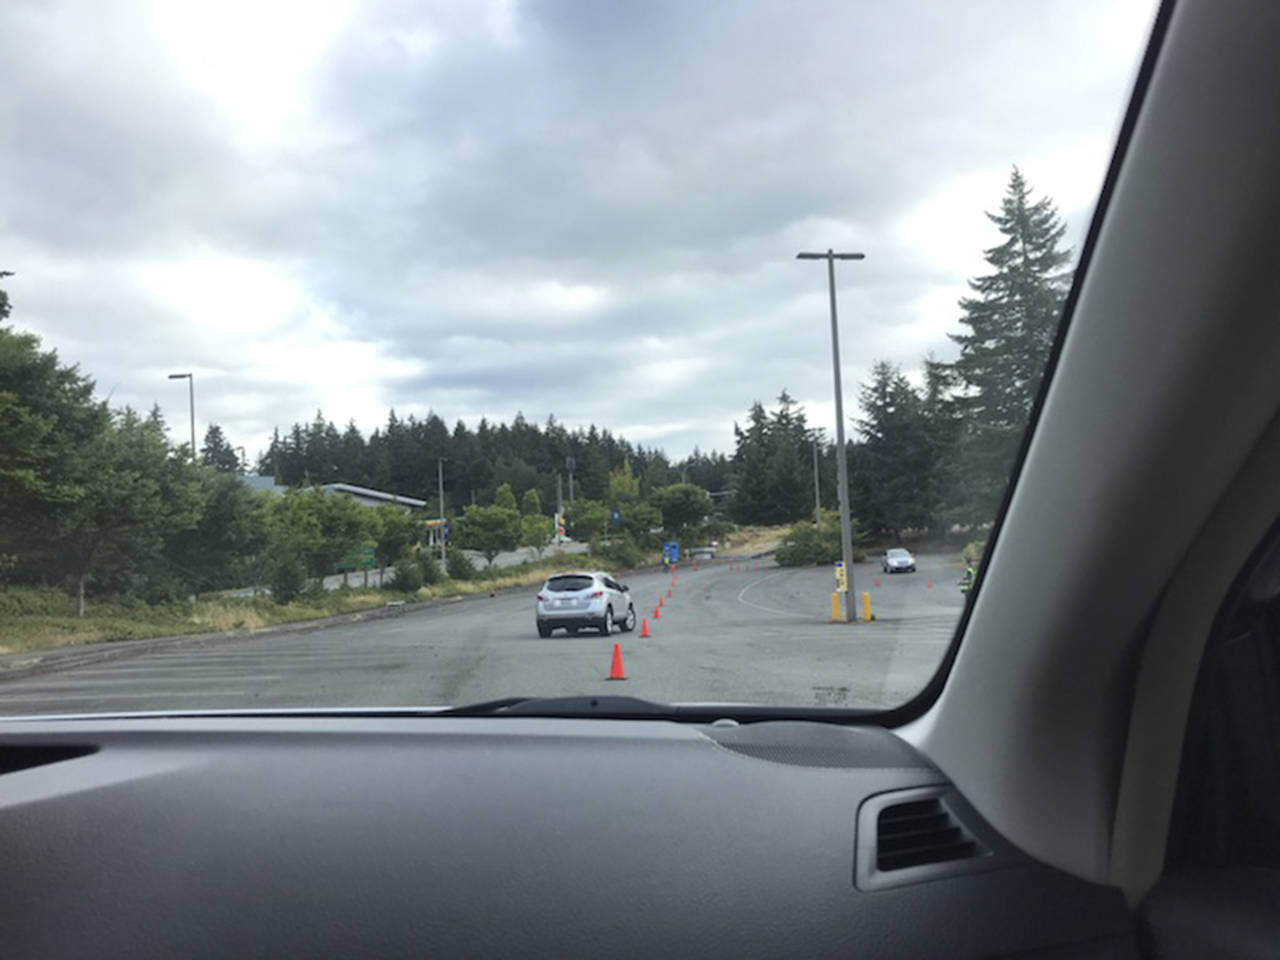 A course of traffic-cone slaloms is one way to help teens improve their driving skills. (Jennifer Bardsley)